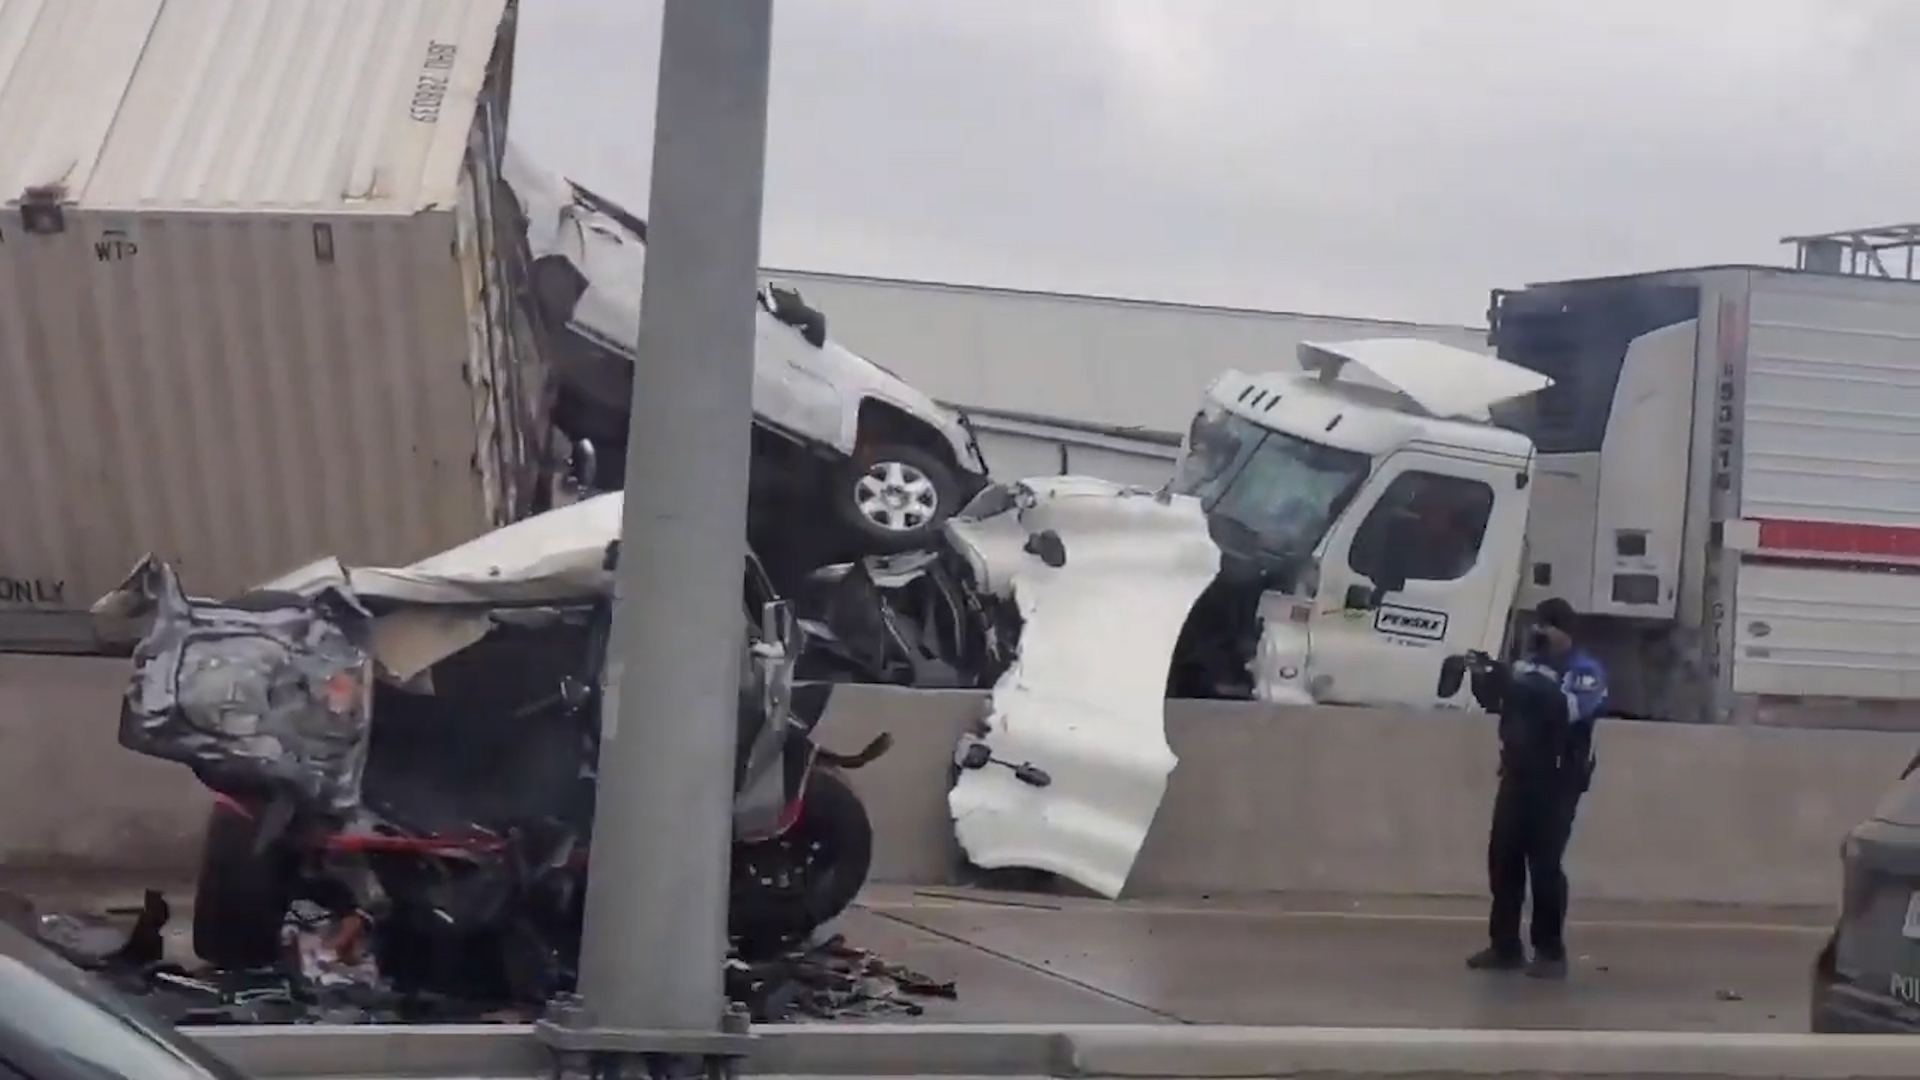 100-car Pileup On Ft Worth Highway Leaves At Least 6 Dead During Ice Storm - The Washington Post